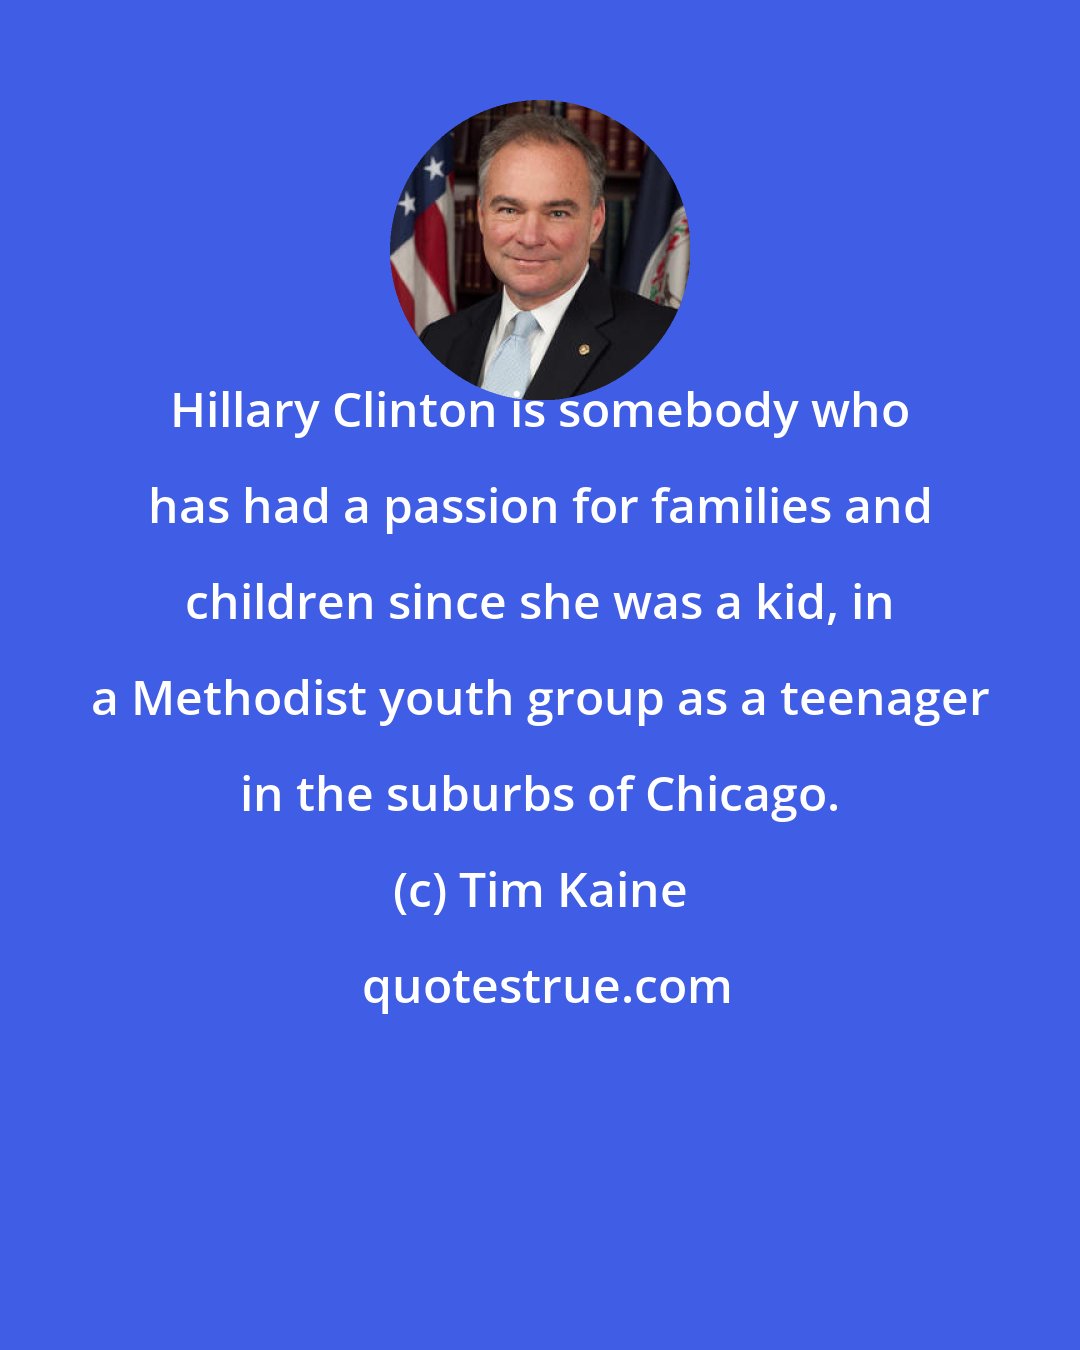 Tim Kaine: Hillary Clinton is somebody who has had a passion for families and children since she was a kid, in a Methodist youth group as a teenager in the suburbs of Chicago.